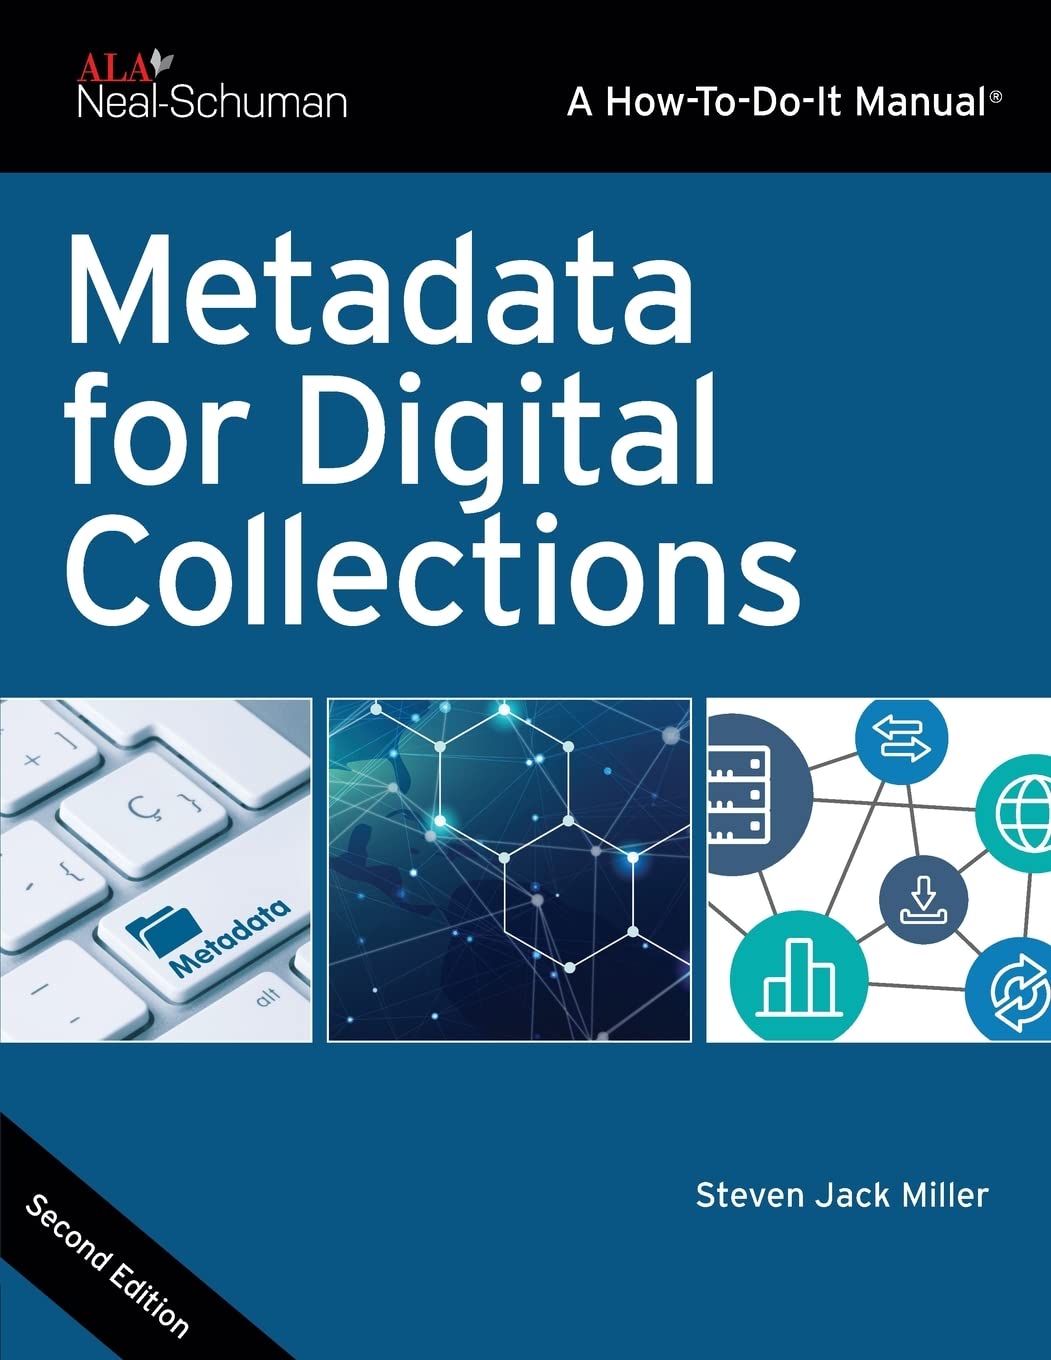 Metadata for Digital Collections: A How-To-Do-It Manual, Second Edition